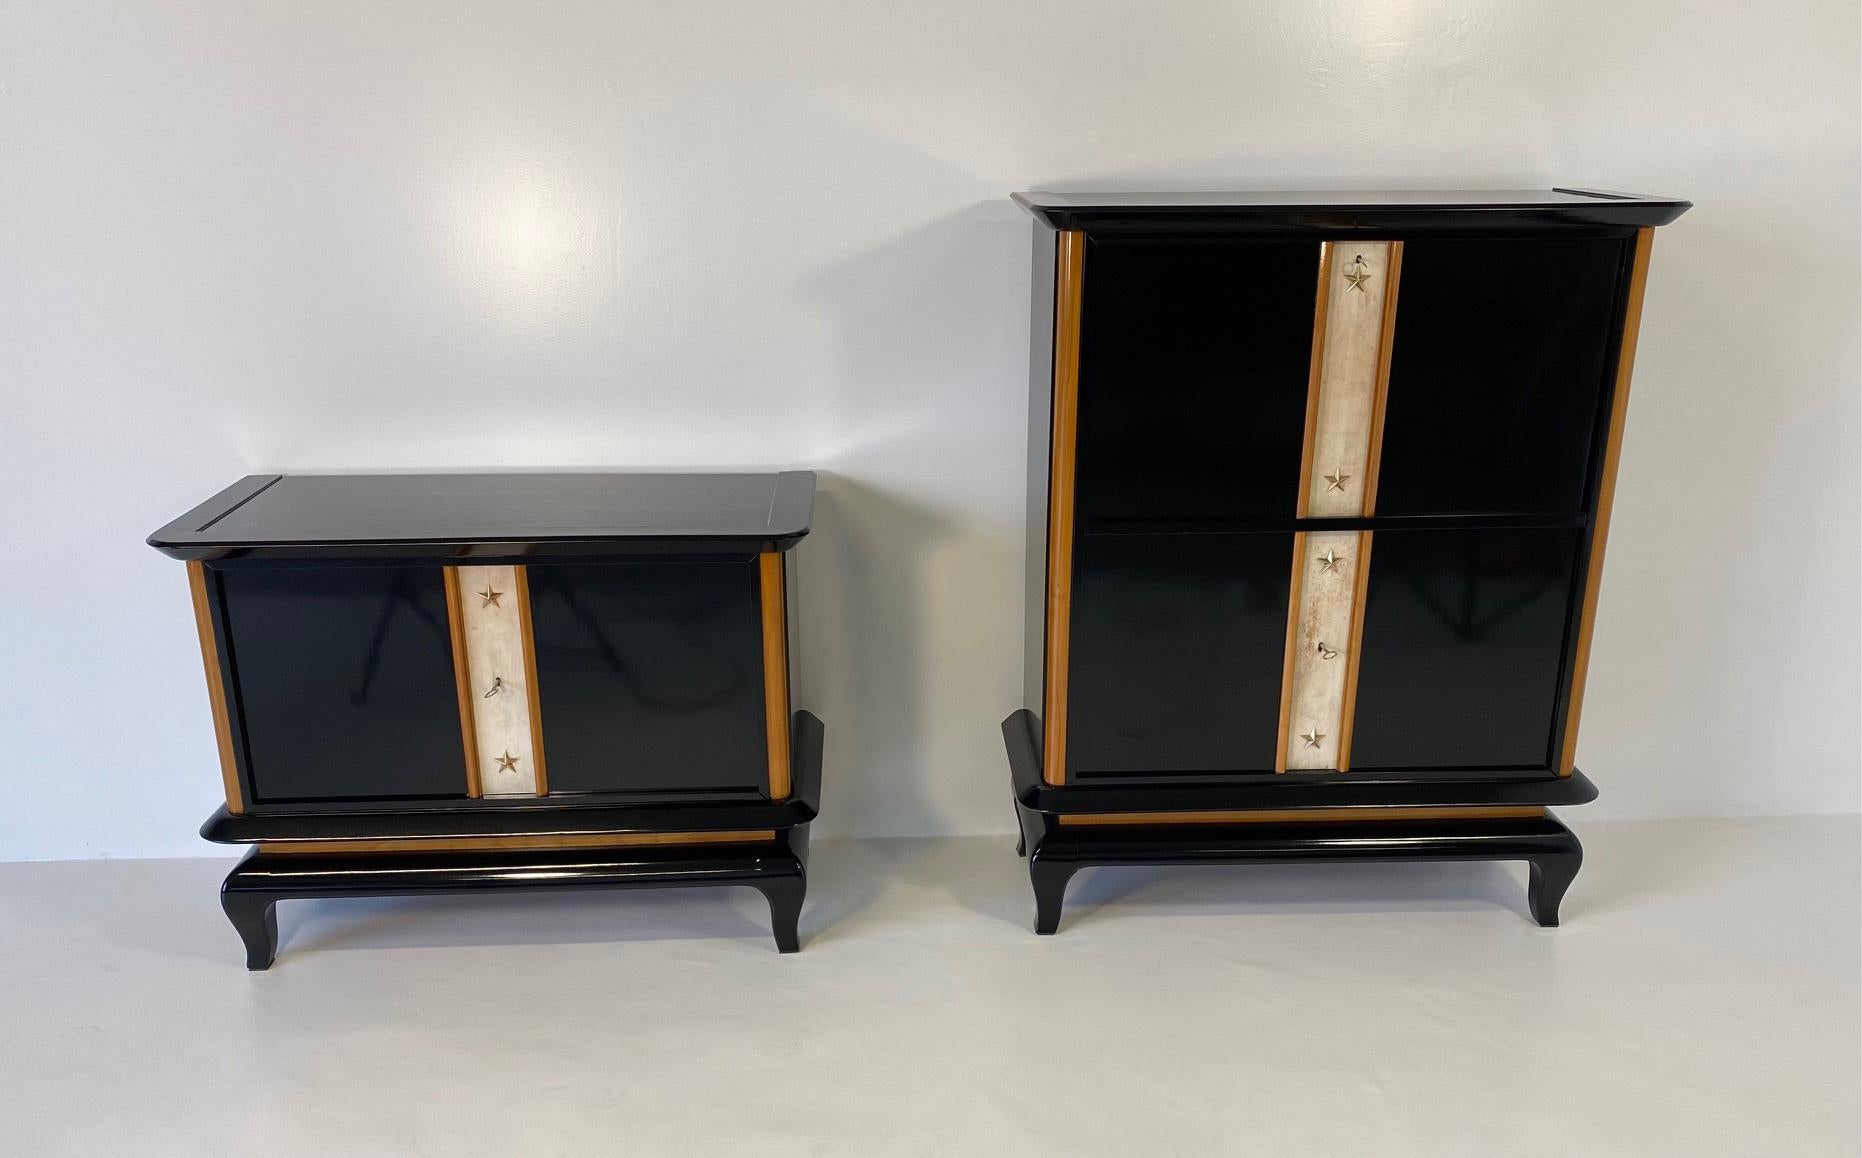 French Art Deco Cabinet in Parchment, Maple and Black Lacquer, 1940s For Sale 8